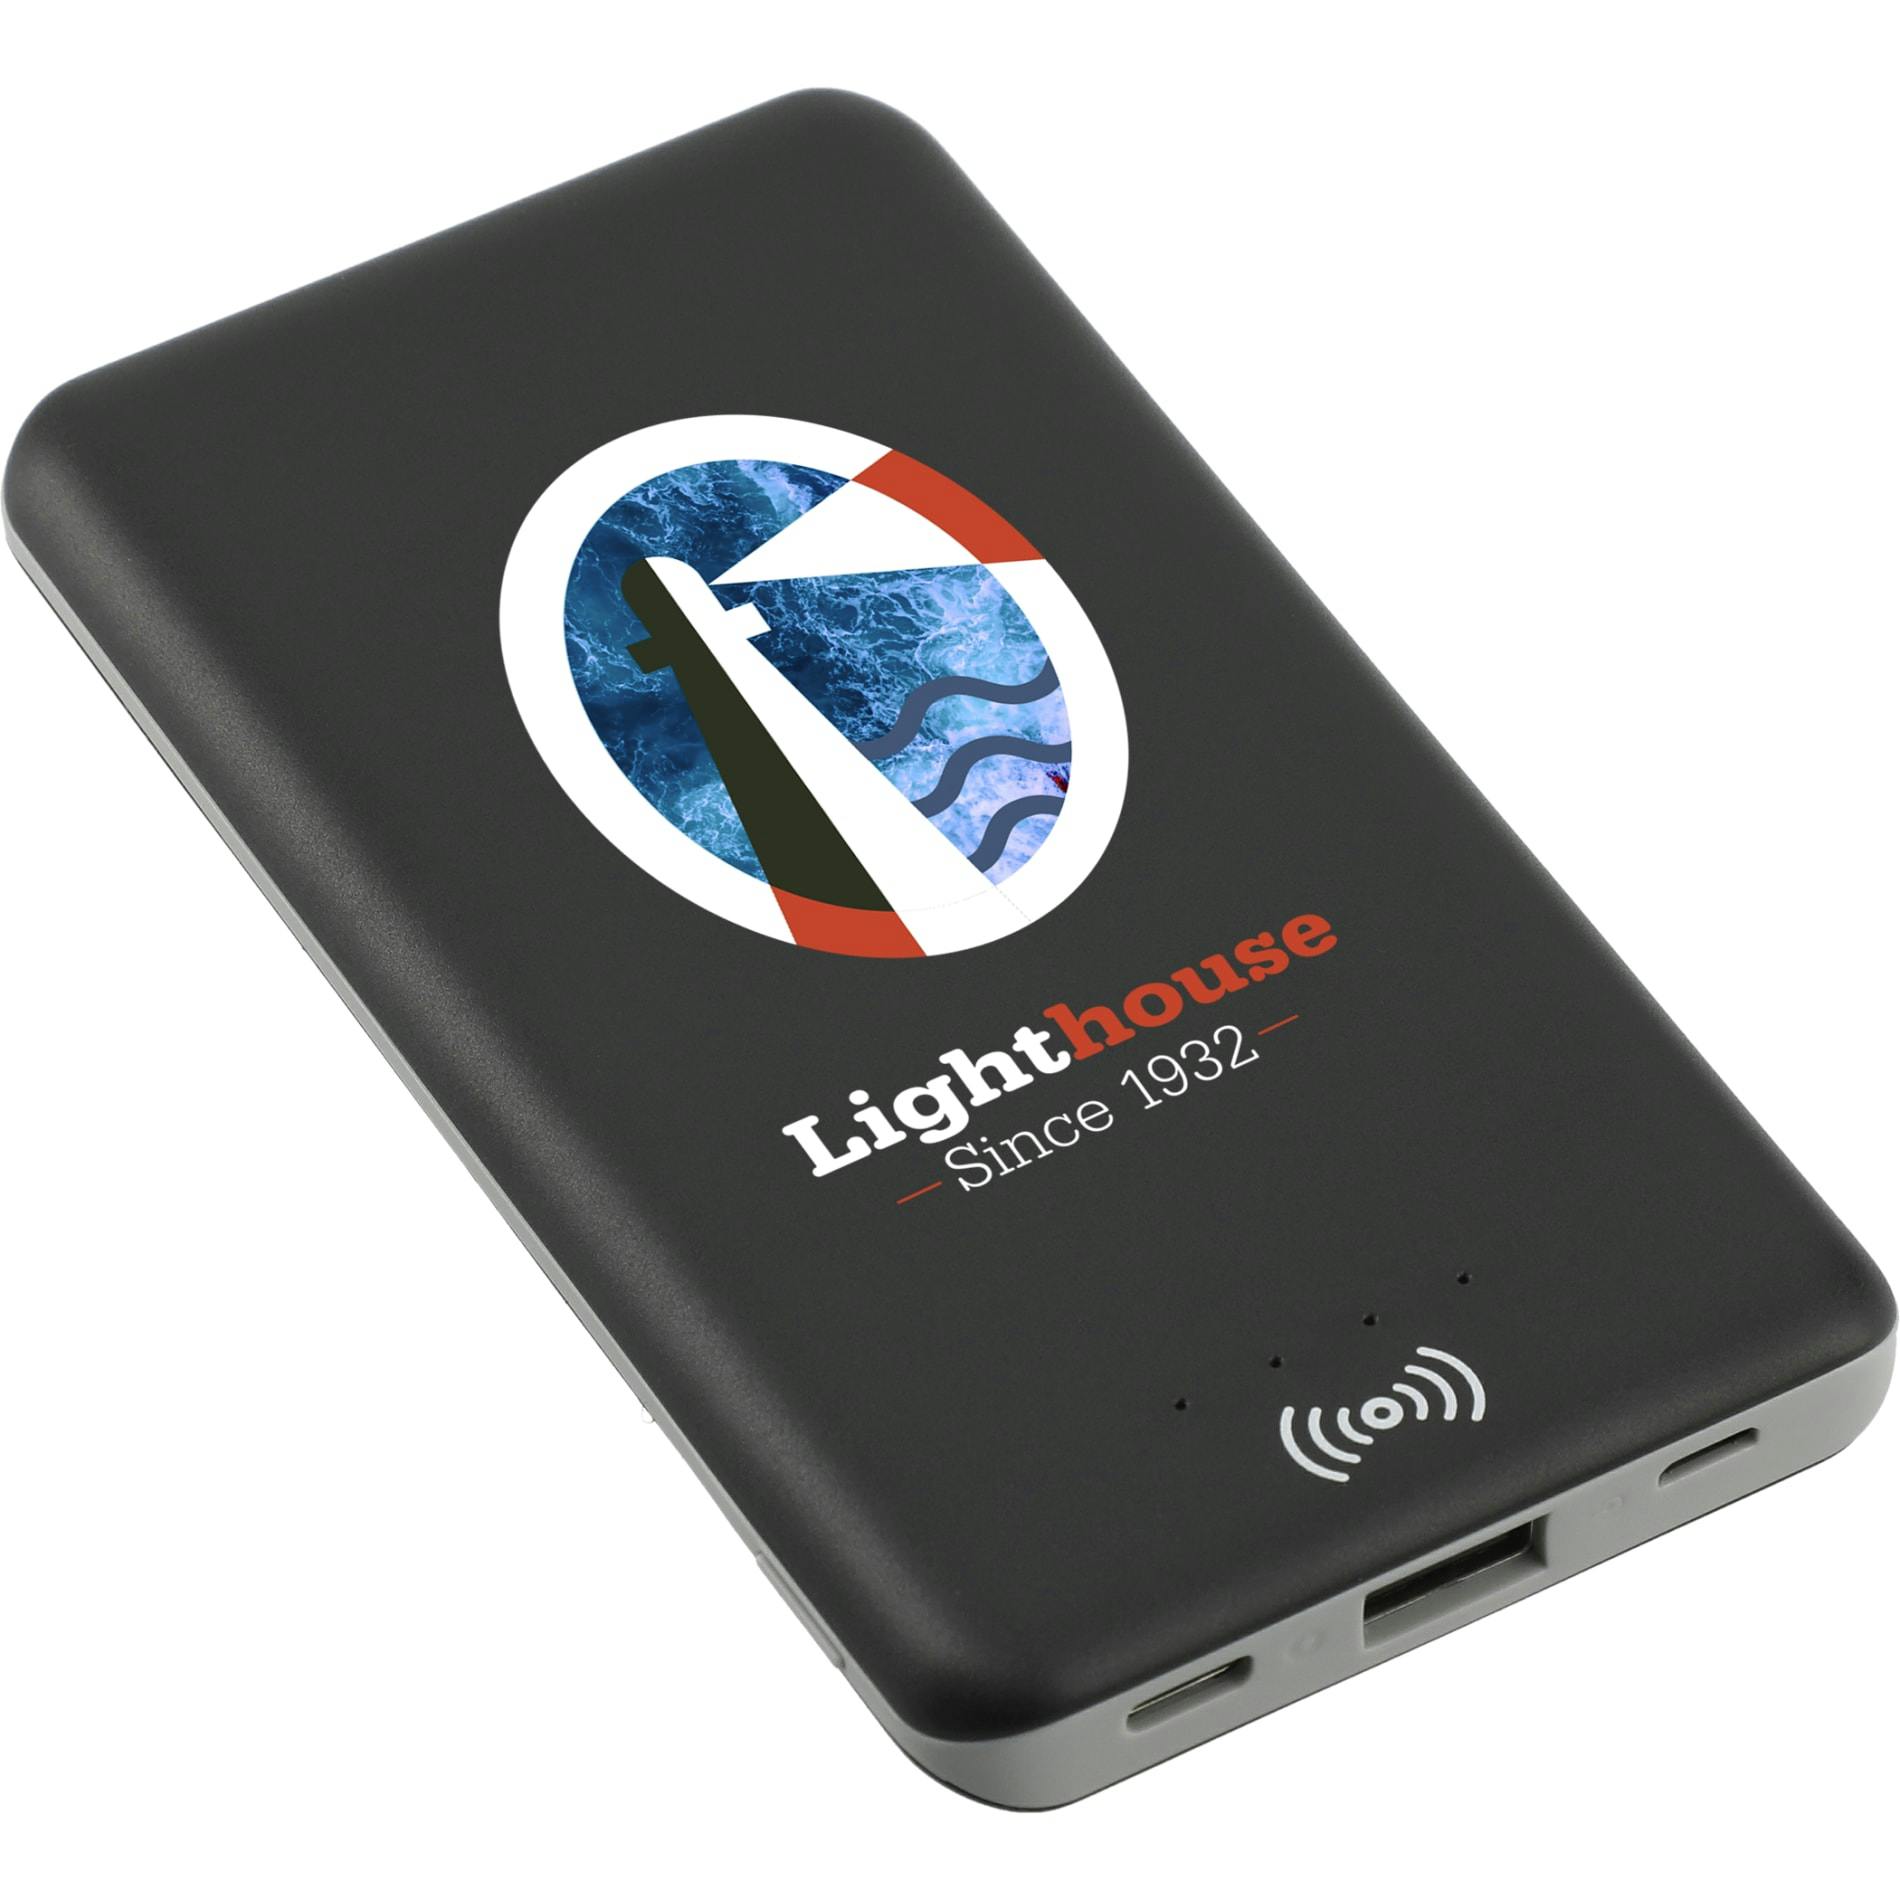 Axial 4000 mAh Wireless Power Bank - additional Image 2